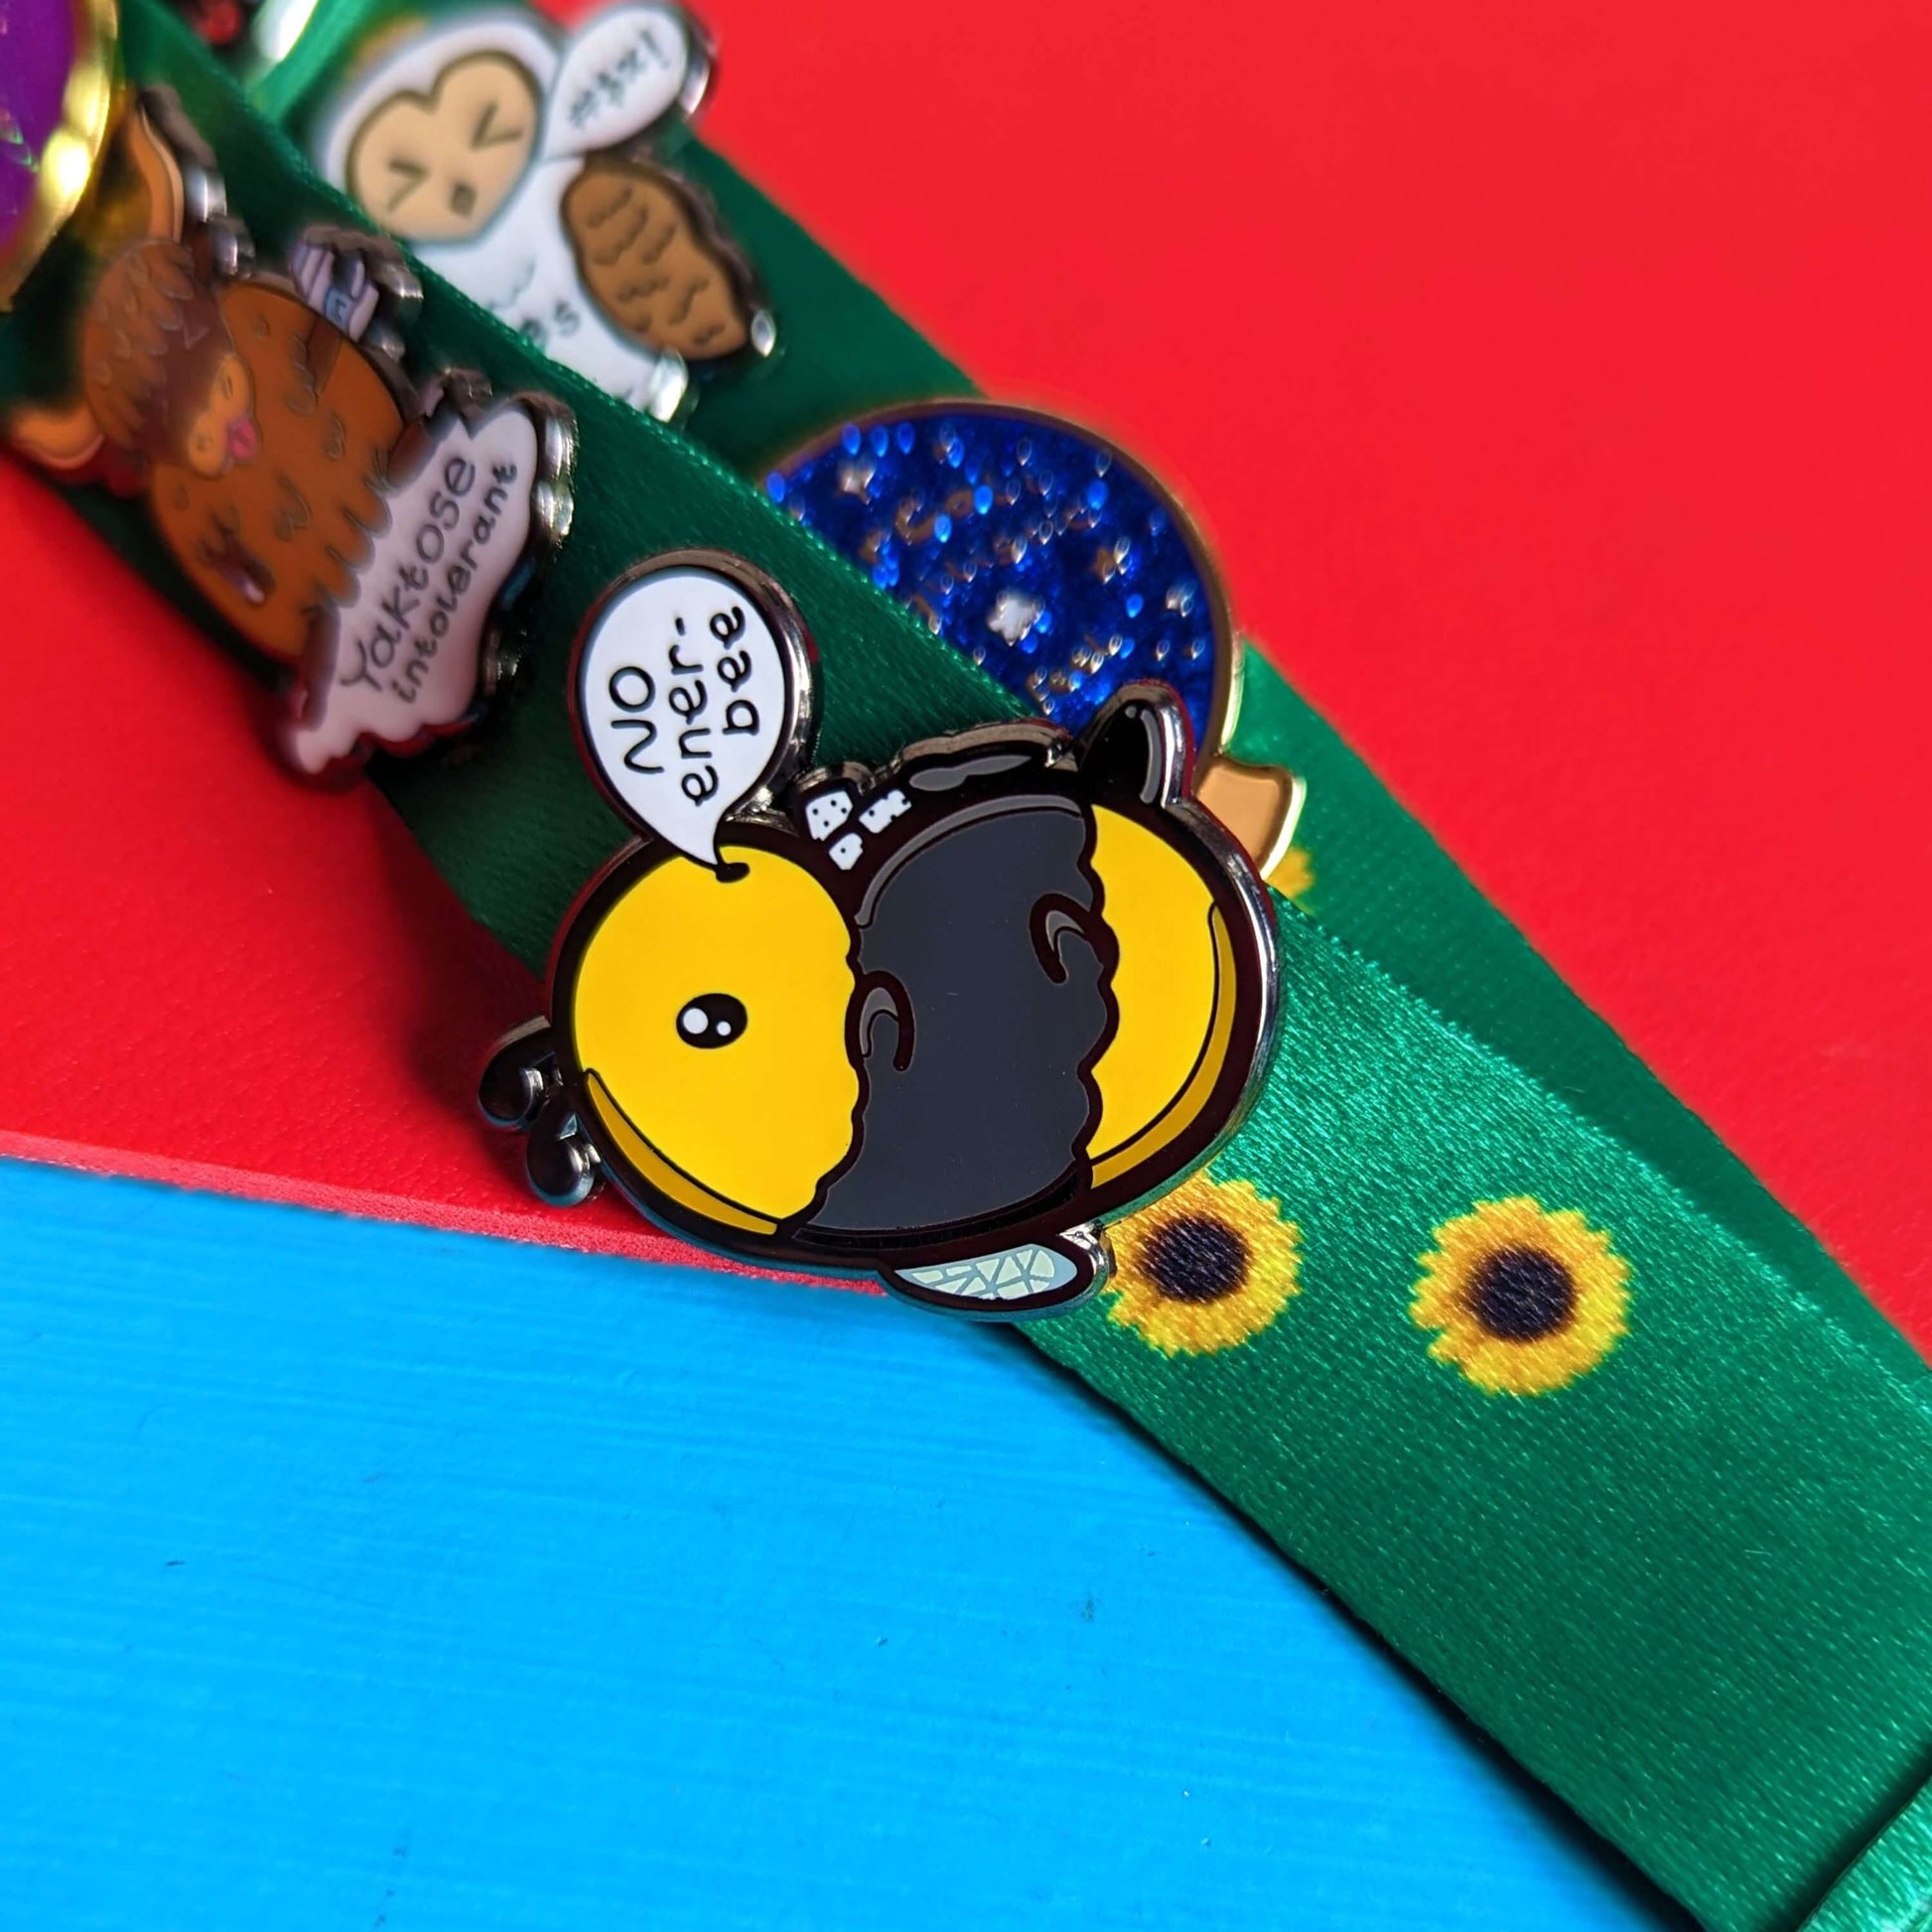 Low Energy Bee Enamel Pin pinned to a sunflower lanyard with other Innabox pins. The enamel pin is a cute yellow and black bee lying on it's wings with its arms, legs, little belly and stinger in the air. The bee has a speech bubble coming from it's mouth with 'NO ener-bee' written inside in black writing. Hand drawn design made to raise awareness for chronic fatigue.